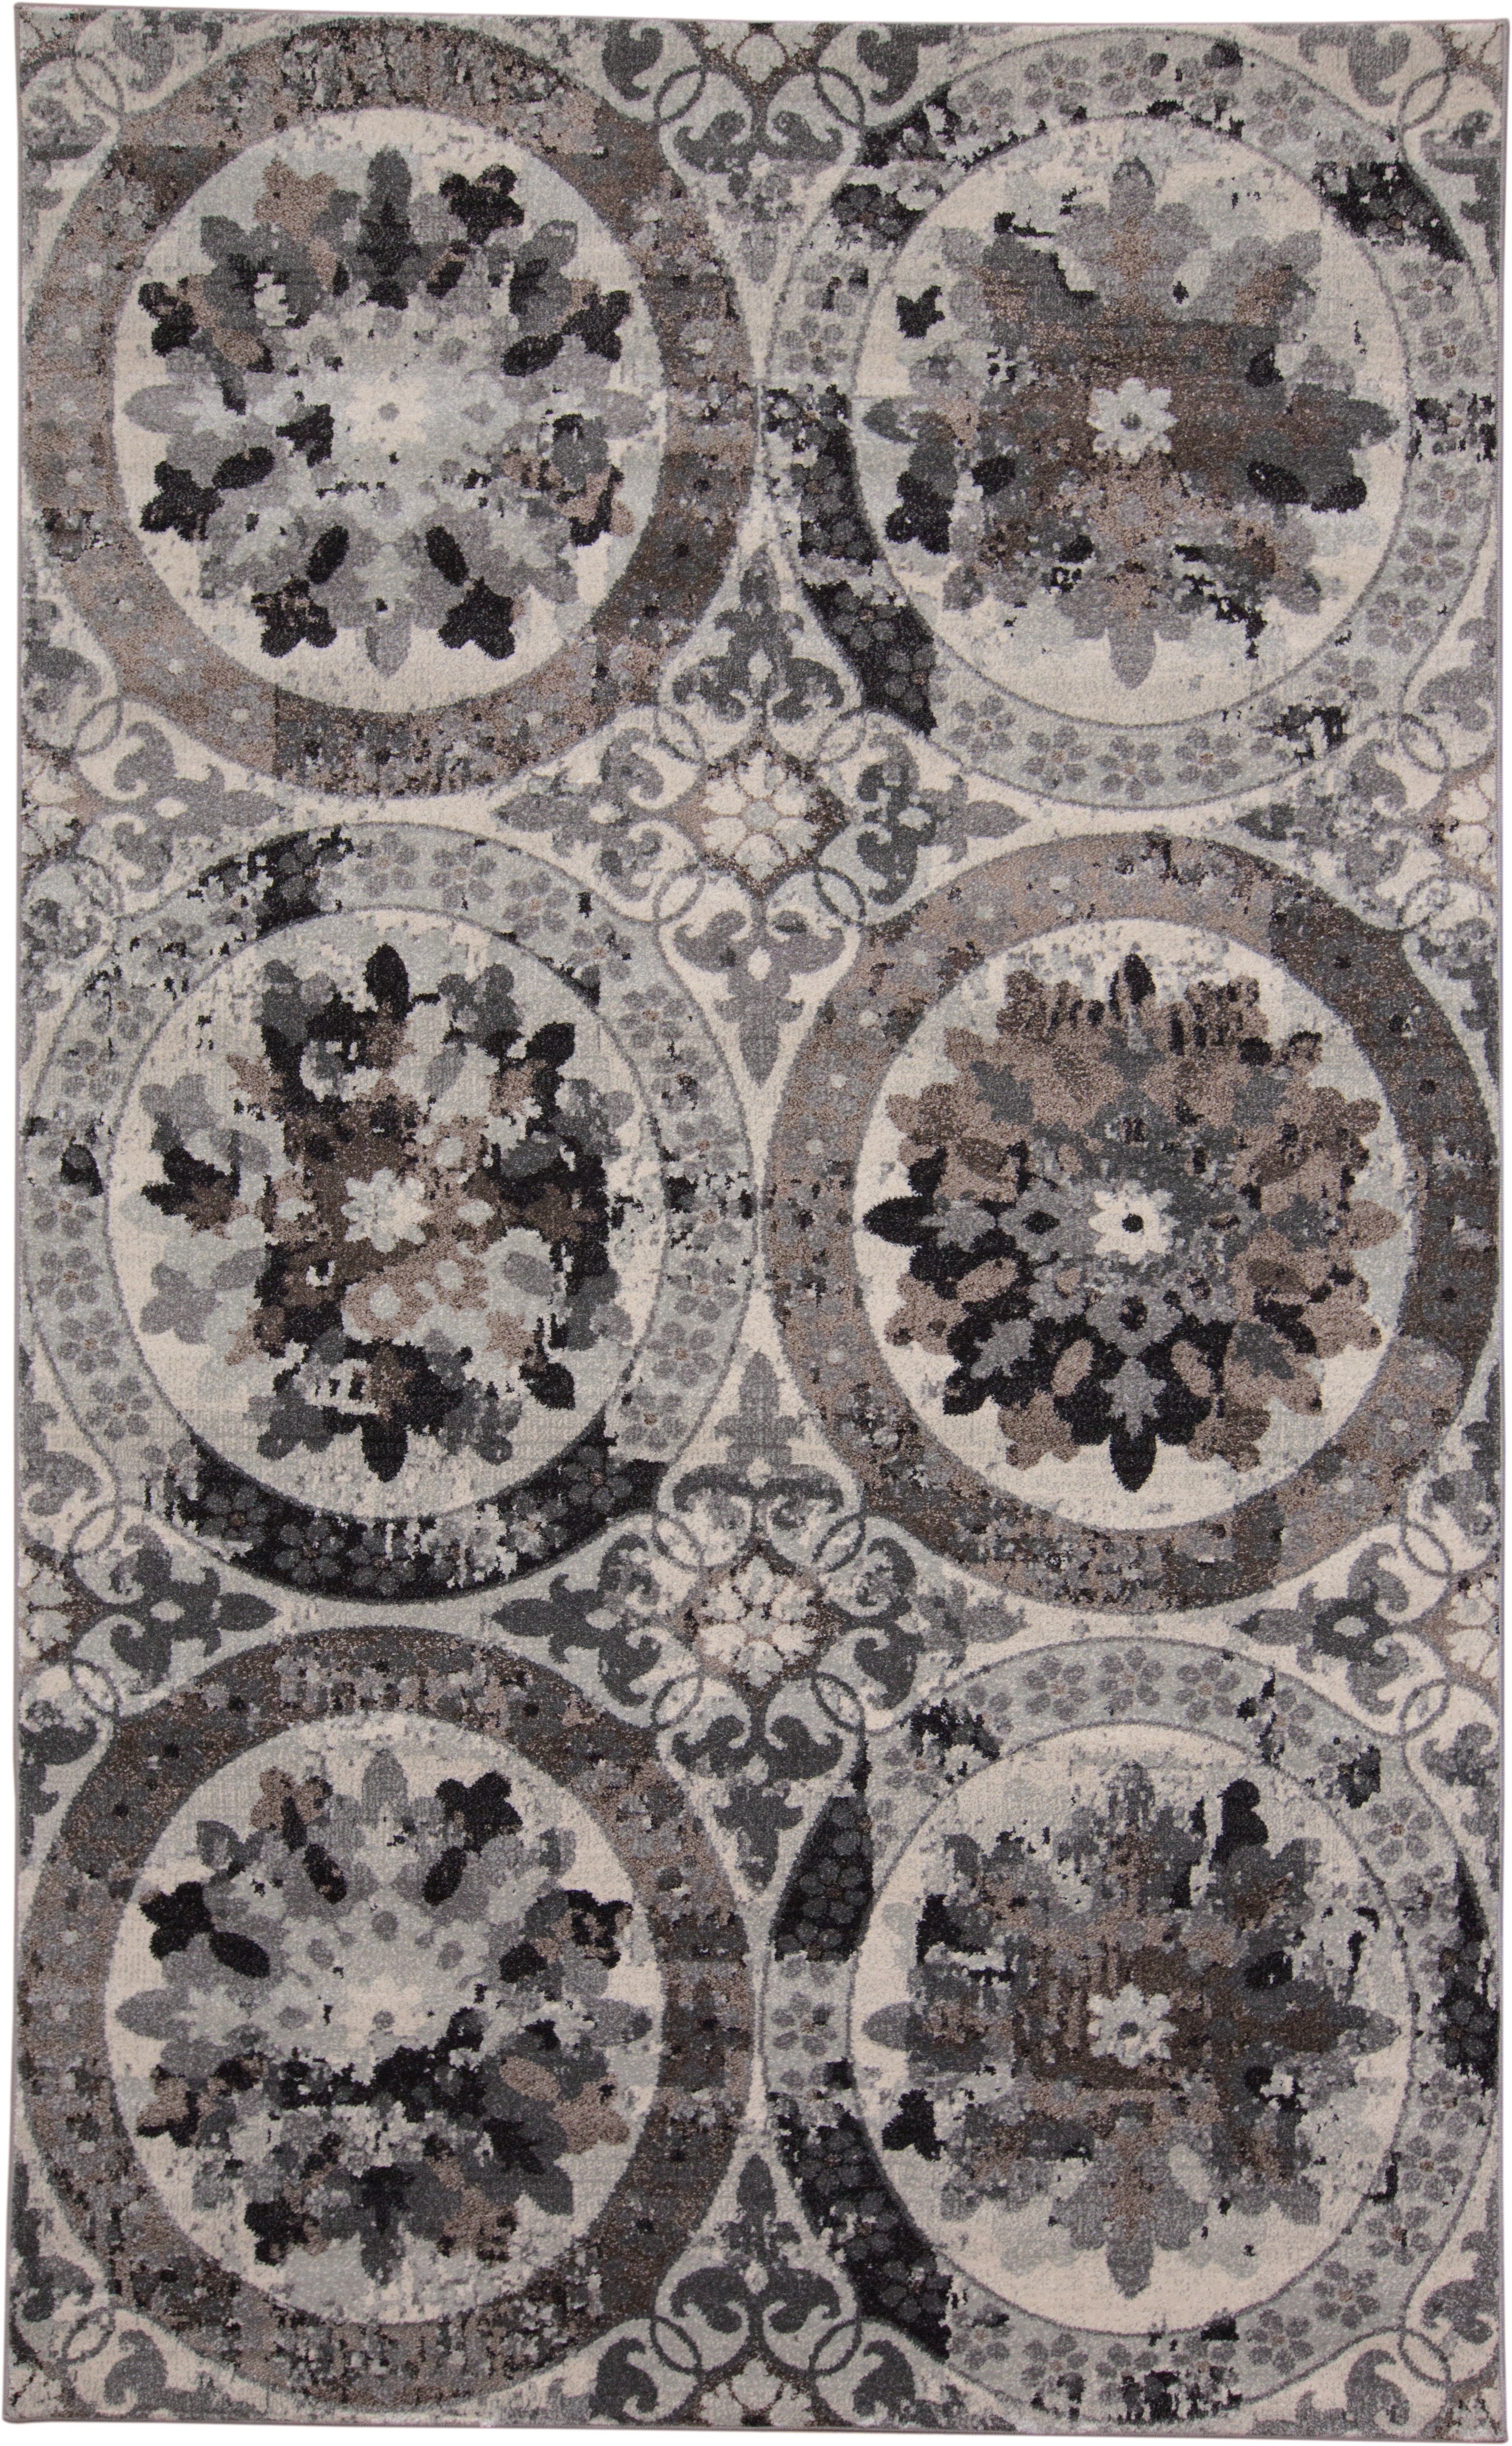 Interesting mix of round and ornate designs on this transitional rectangular rug - Get traditional and transitional home furnishings in Santa Clara 